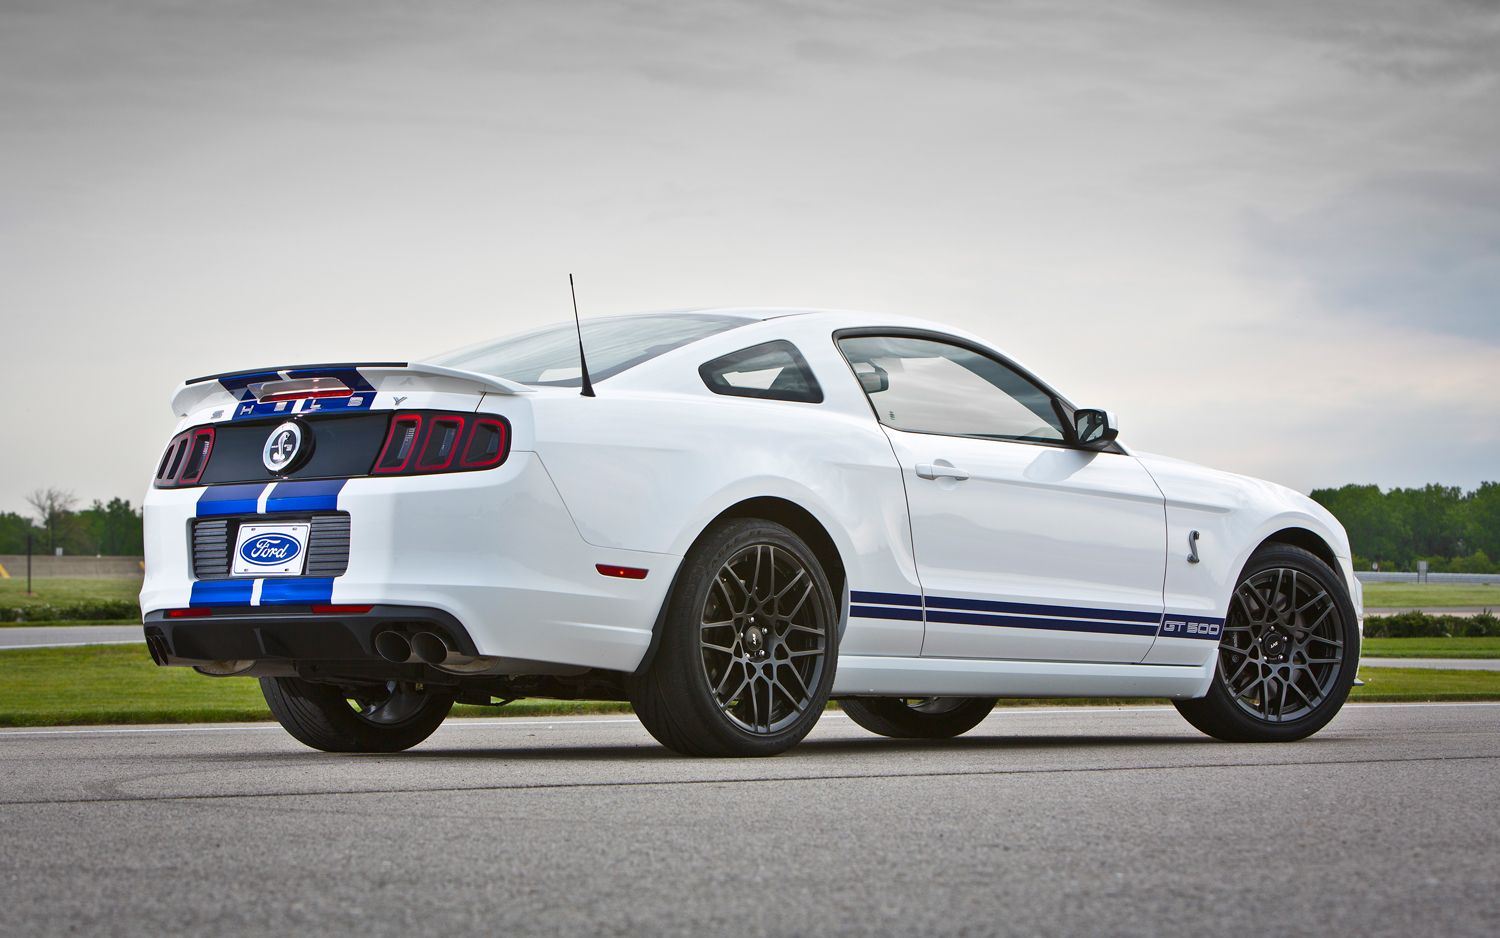 Ford Mustang Shelby Gt500 HD Wallpaper Picture Size